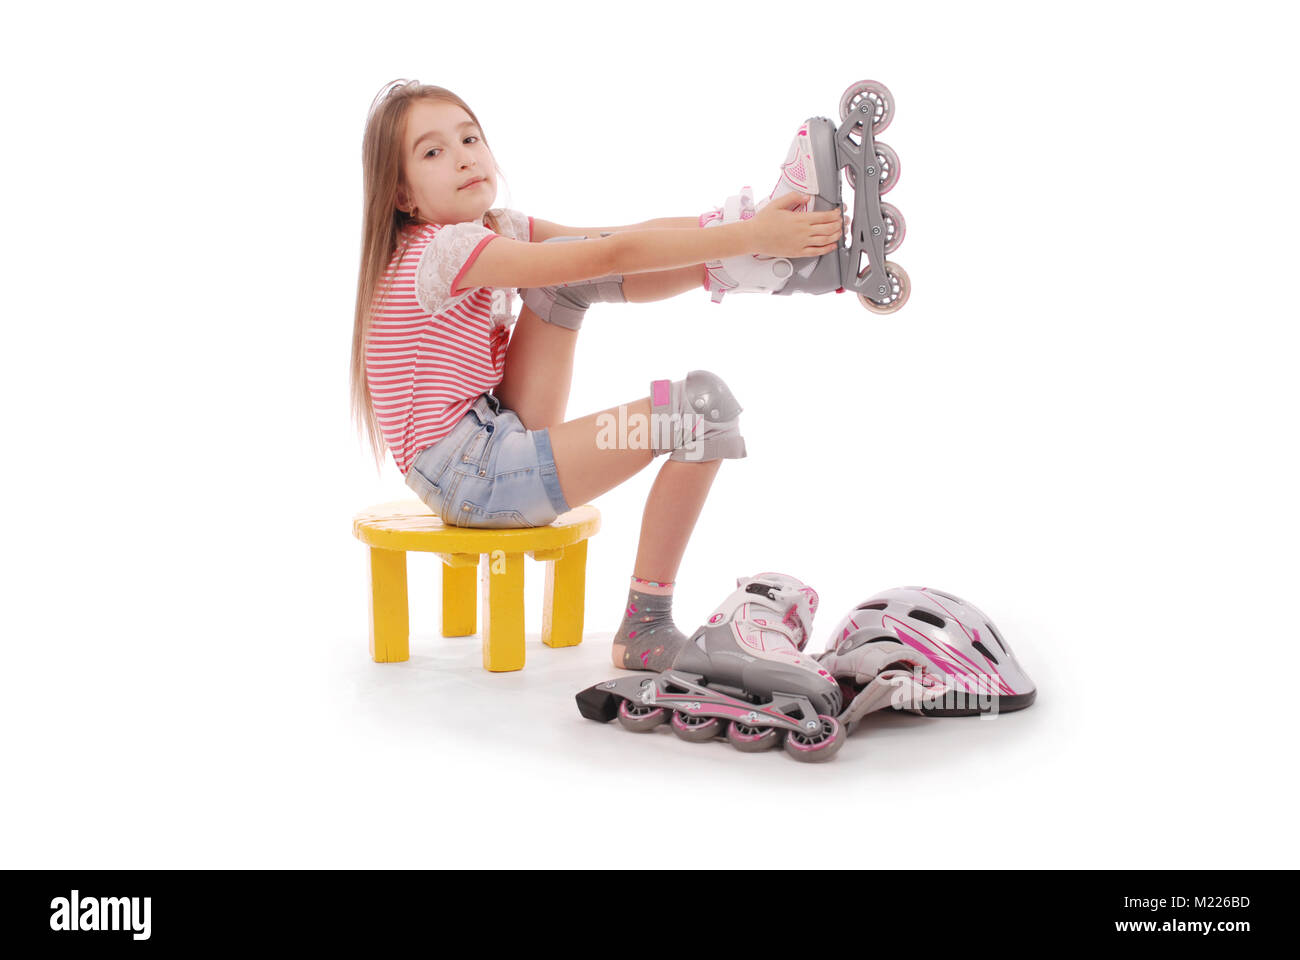 Charming broun-haired girl of school age in short jeans shorts and a pink t-shirt sitting on the chair and tries to foot roller skates. Isolated on wh Stock Photo